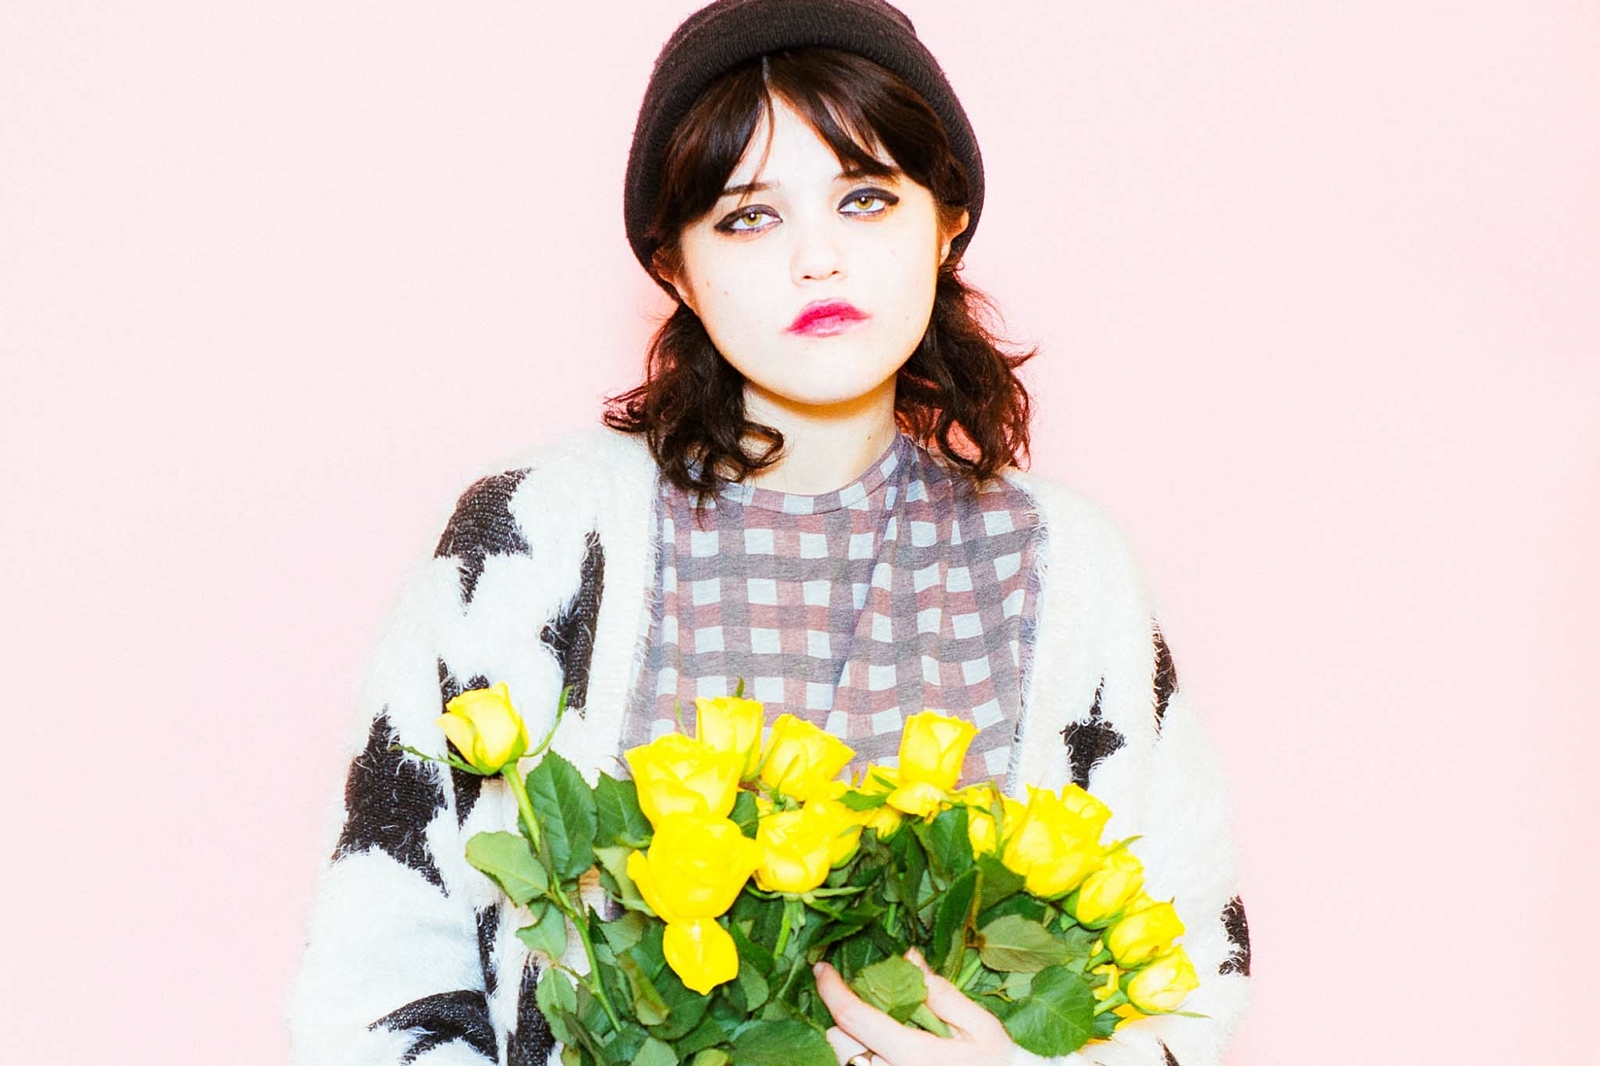 Night Time, Sky's time: 2016 and the return of Sky Ferreira